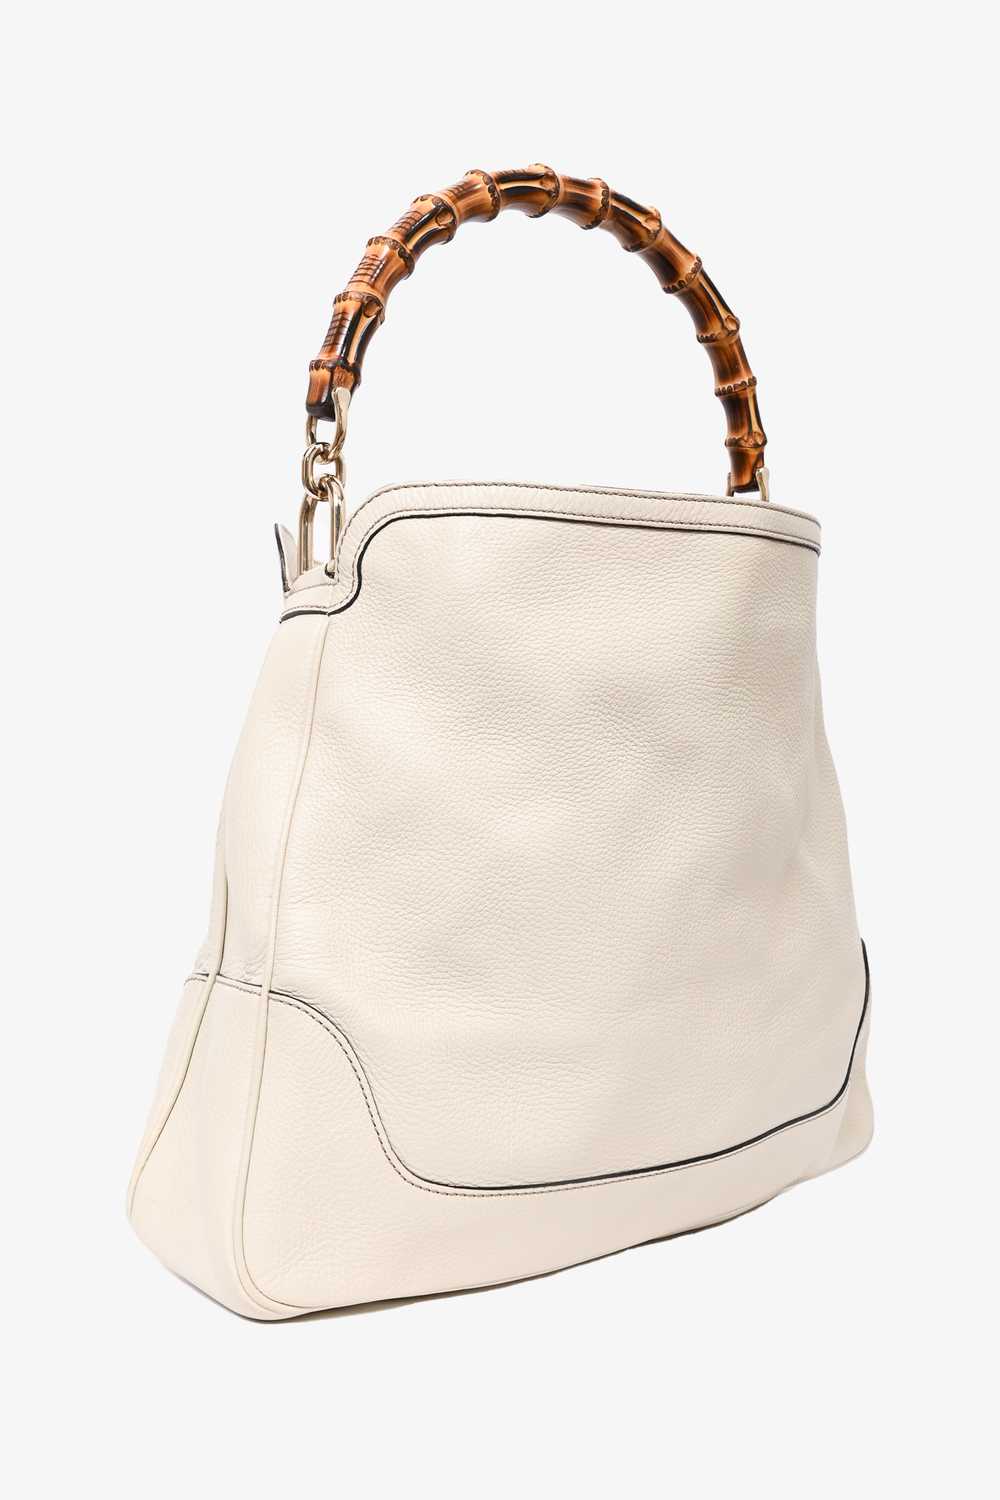 Gucci Cream Leather Bamboo 'Diana' Large Tote - image 3